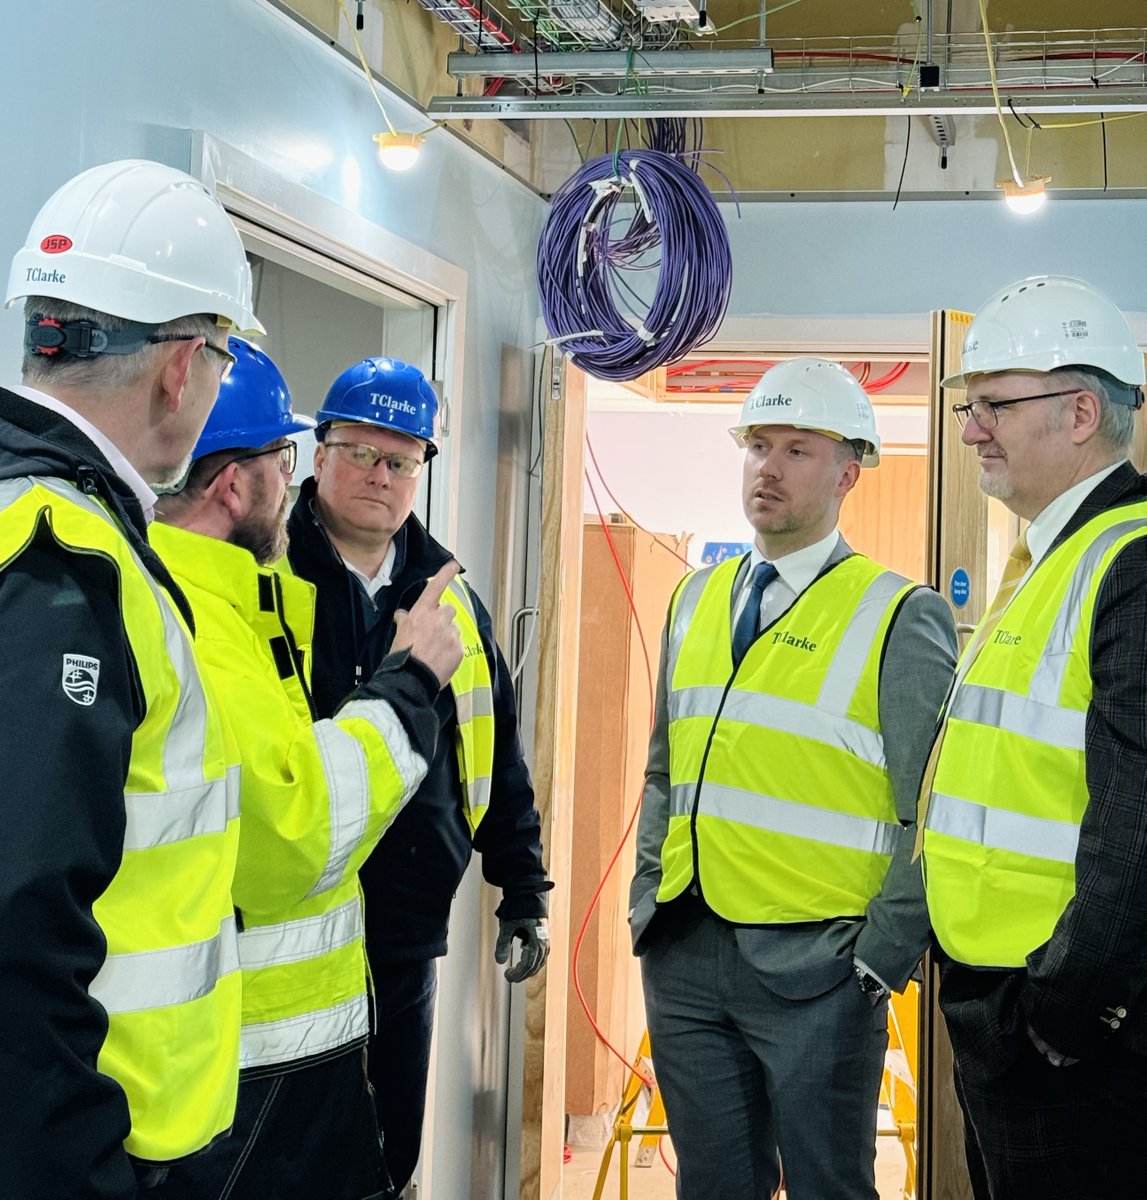 Health Secretary @neilcgray toured various facilities in Shetland, including Overtonlea Care Centre, Scalloway Health Centre, and several areas within the Gilbert Bain Hospital. Highlights of his visit included meeting staff and visiting the site of Shetland’s new MRI scanner.